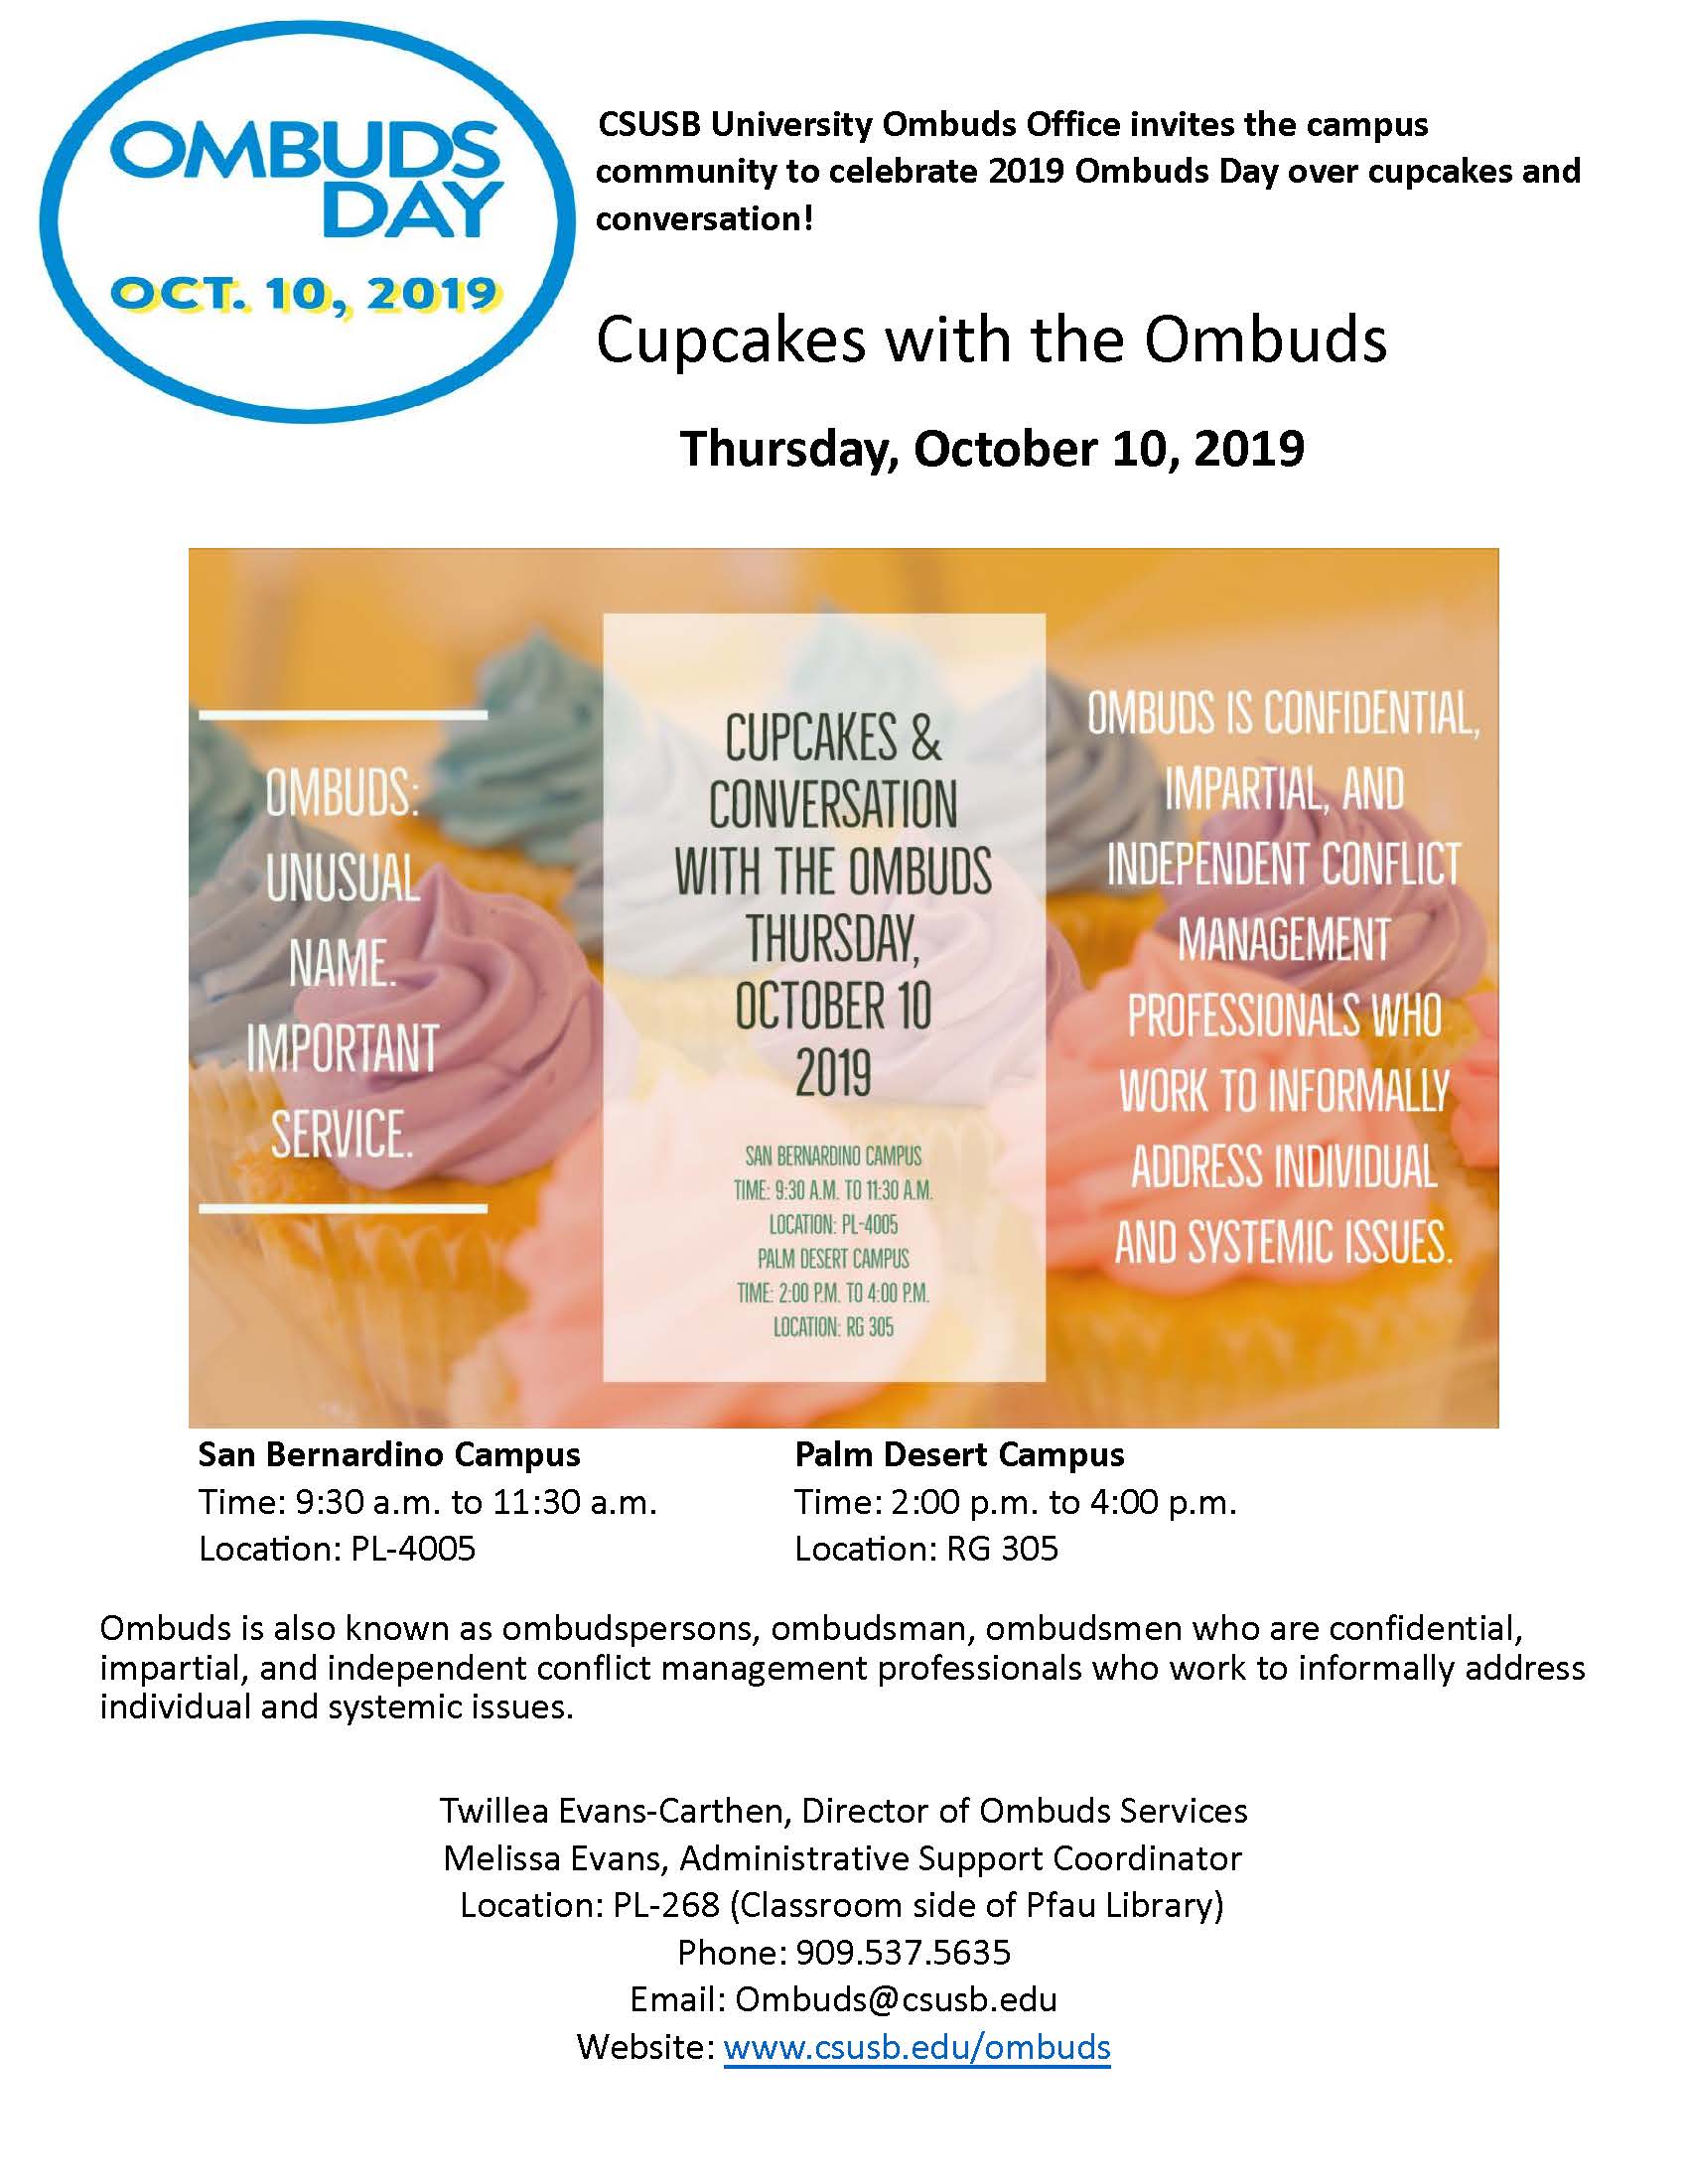 National Ombuds Day: Cupcakes with the Ombuds